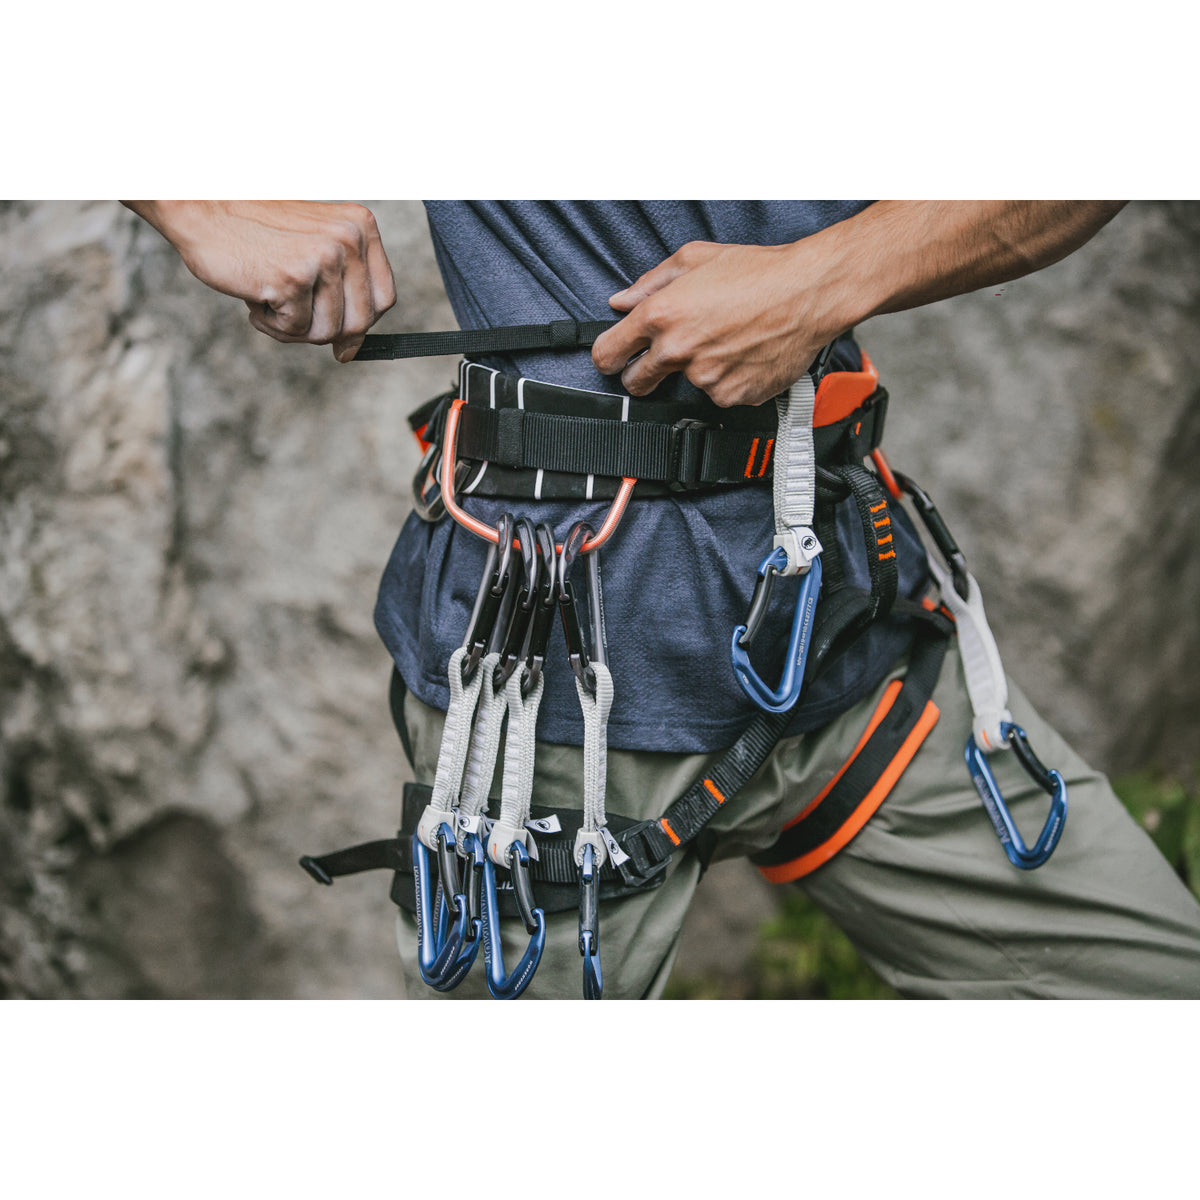 Mammut 4 Slide Harness in use, life style shot